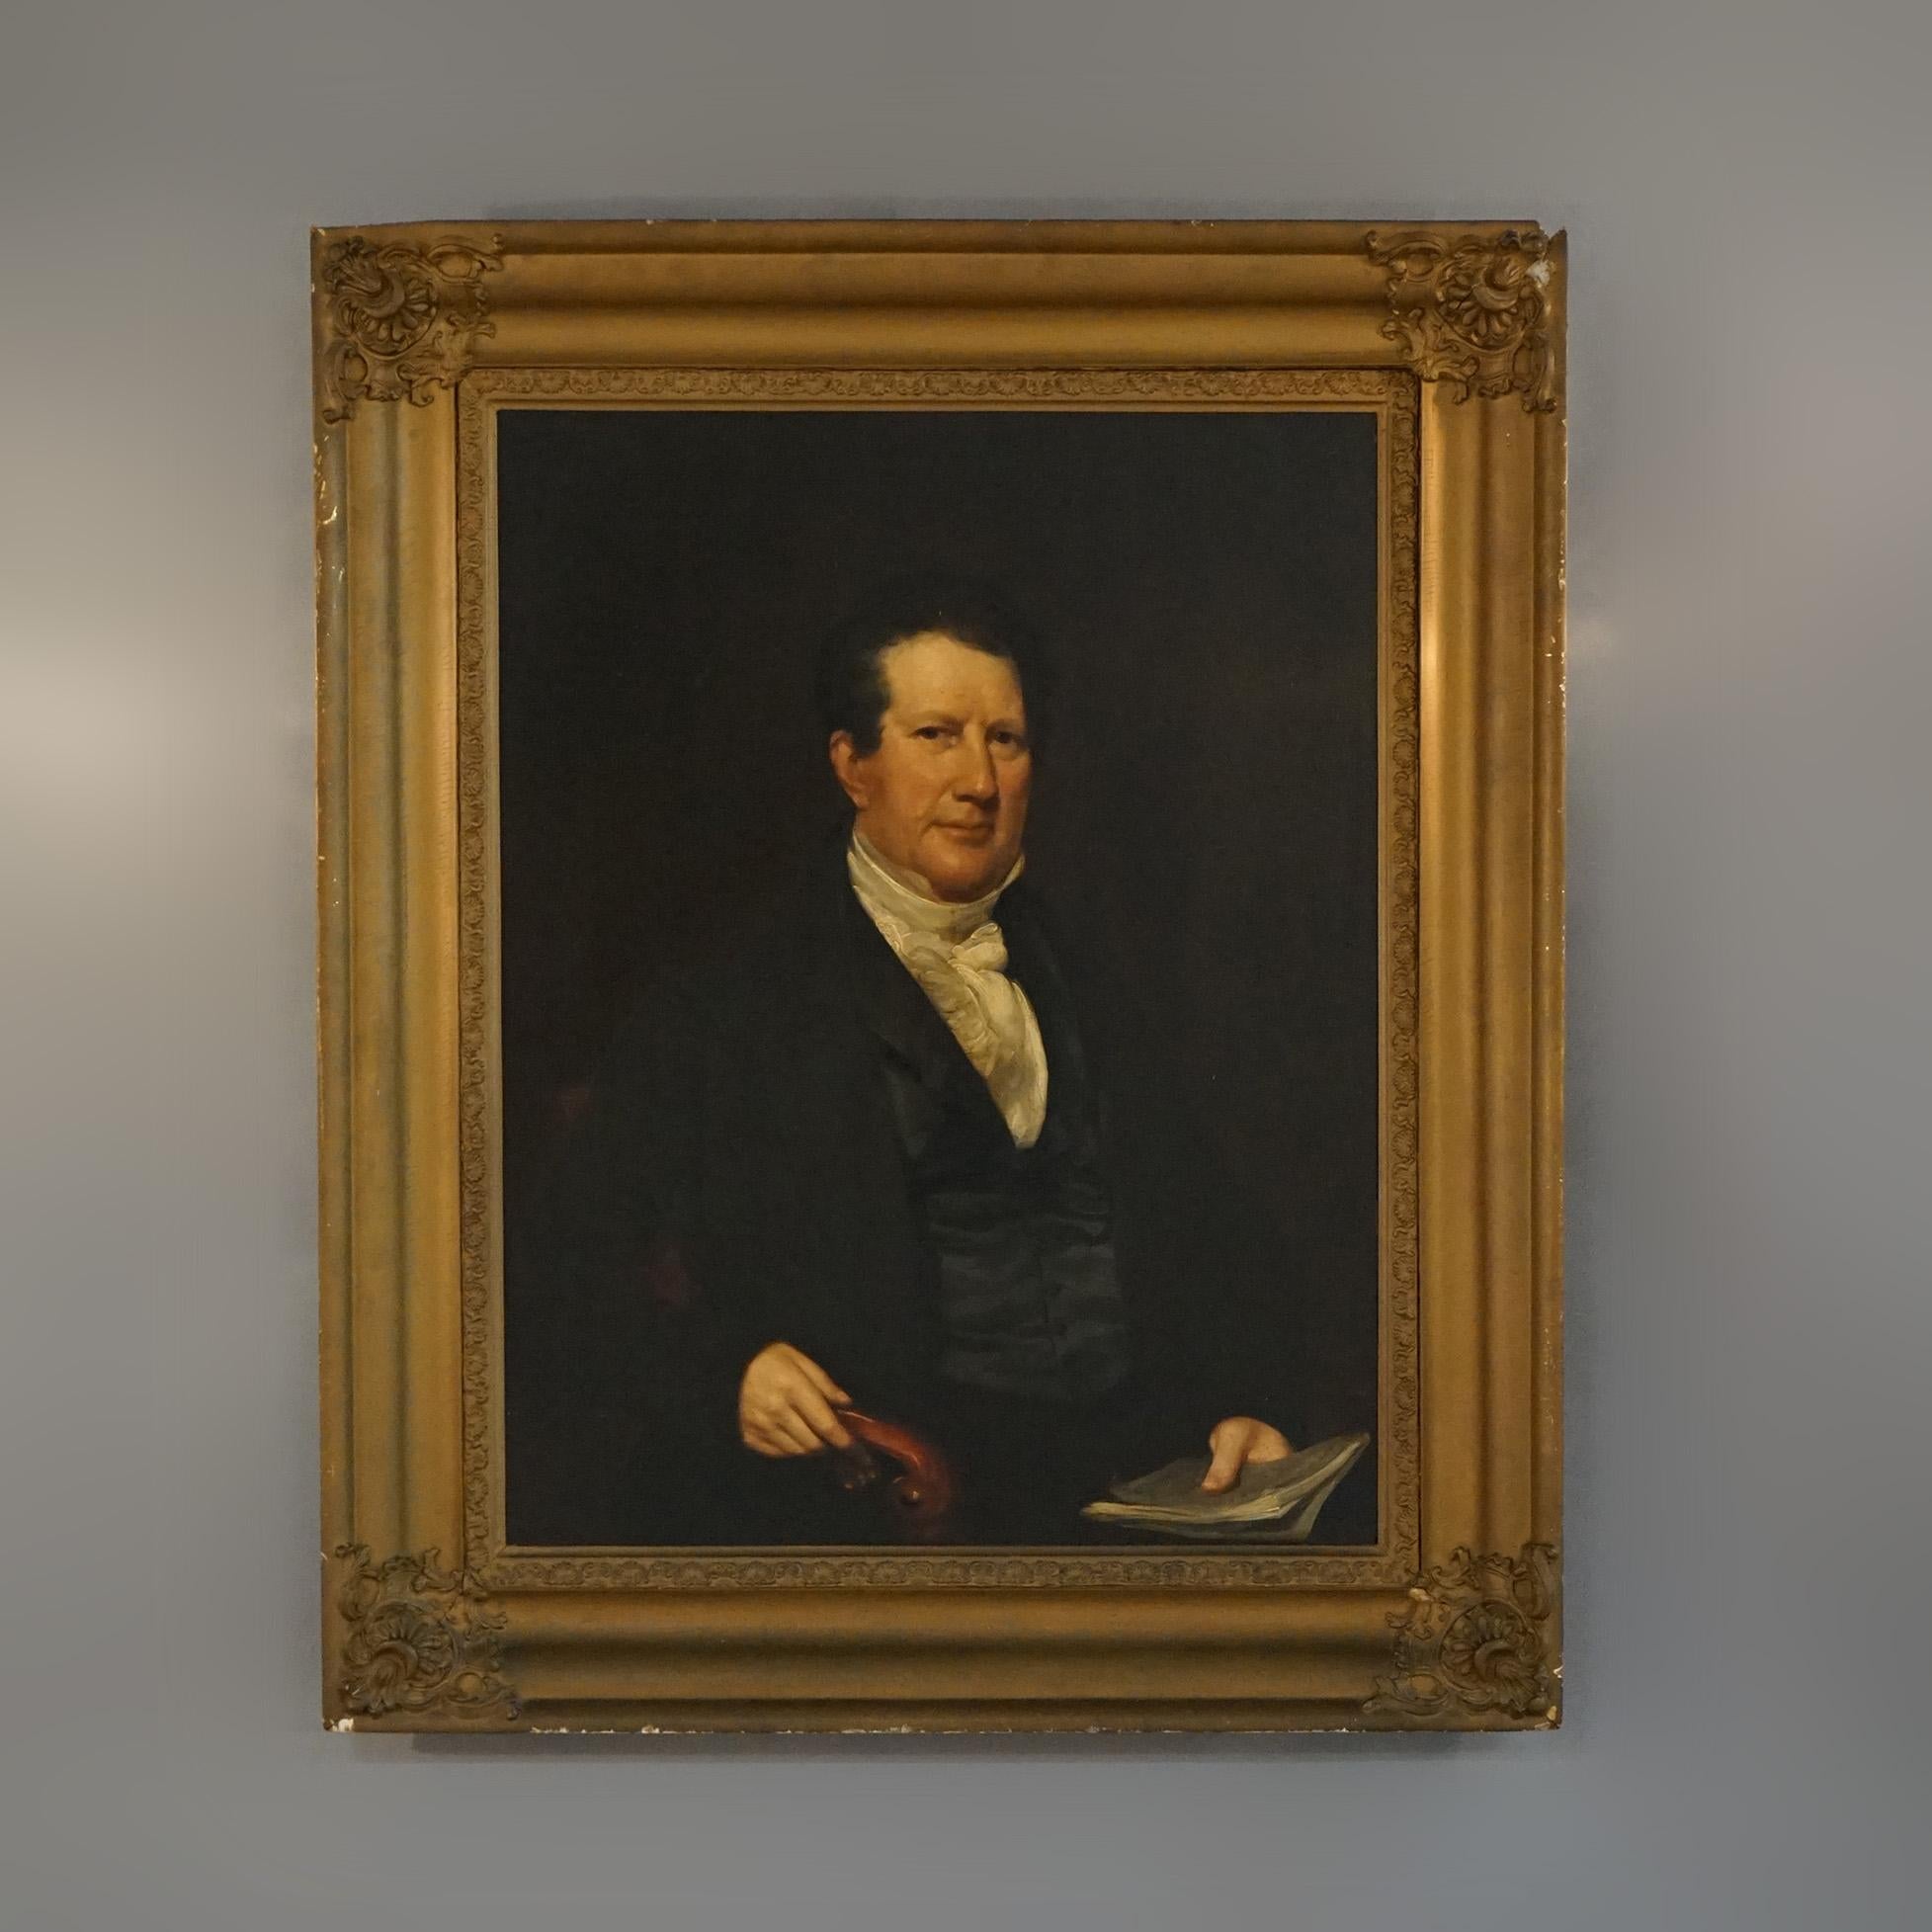 An antique painting offers oil on wood panel portrait of a man, artist singed, seated in giltwood frame, c1855

Measures - 47